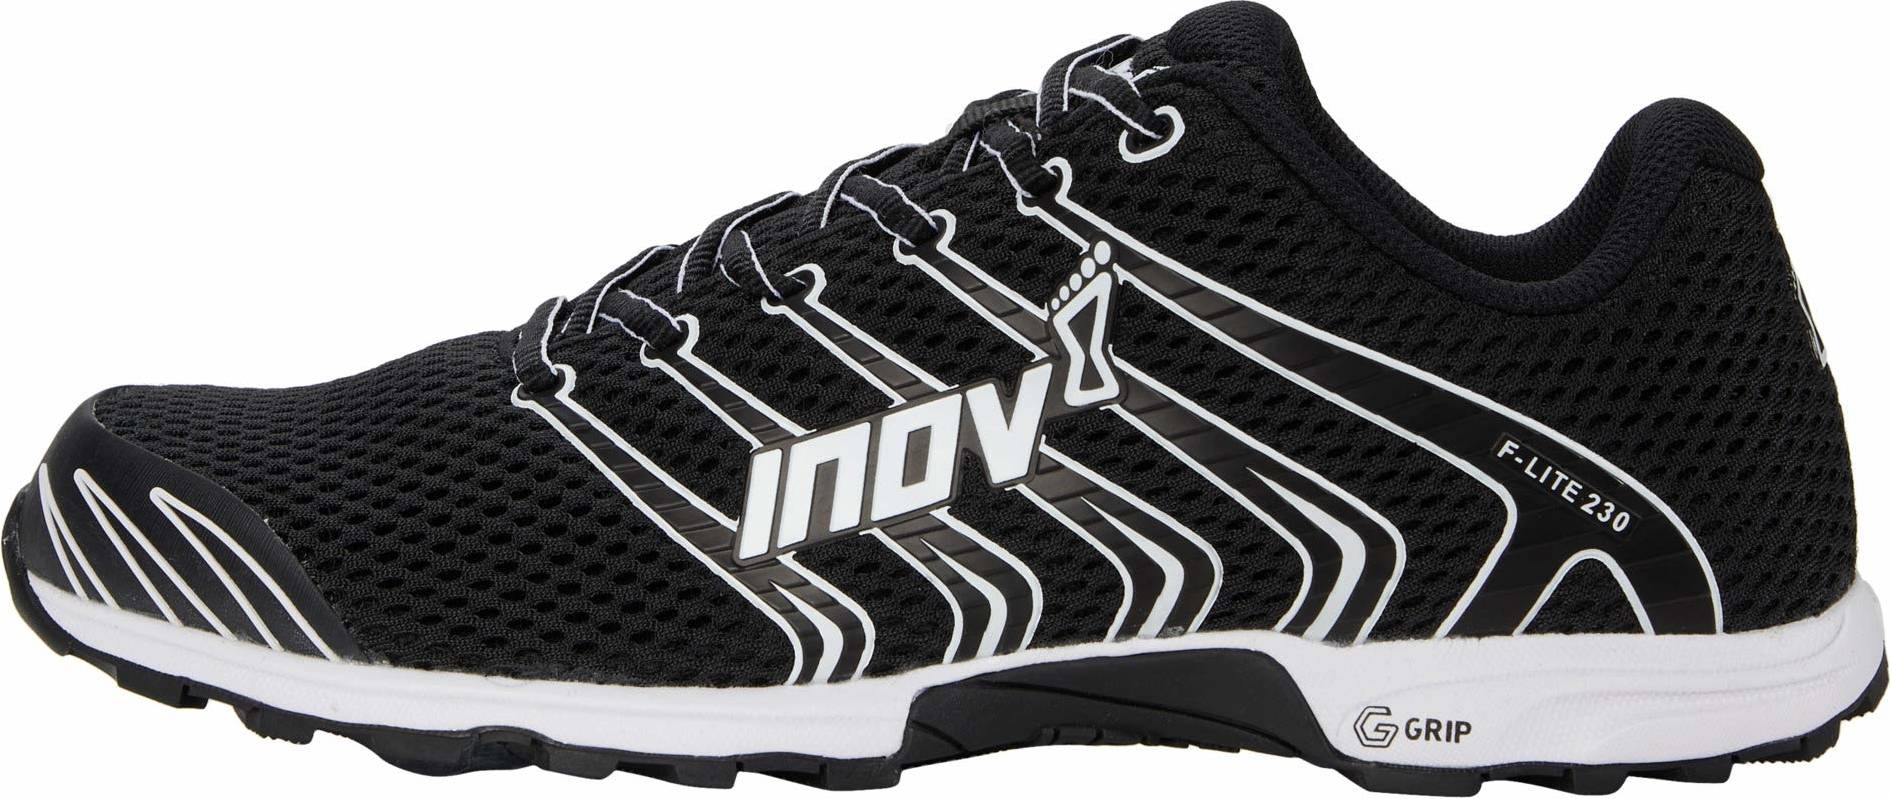 Only $50 + Review of Inov-8 F-Lite 230 